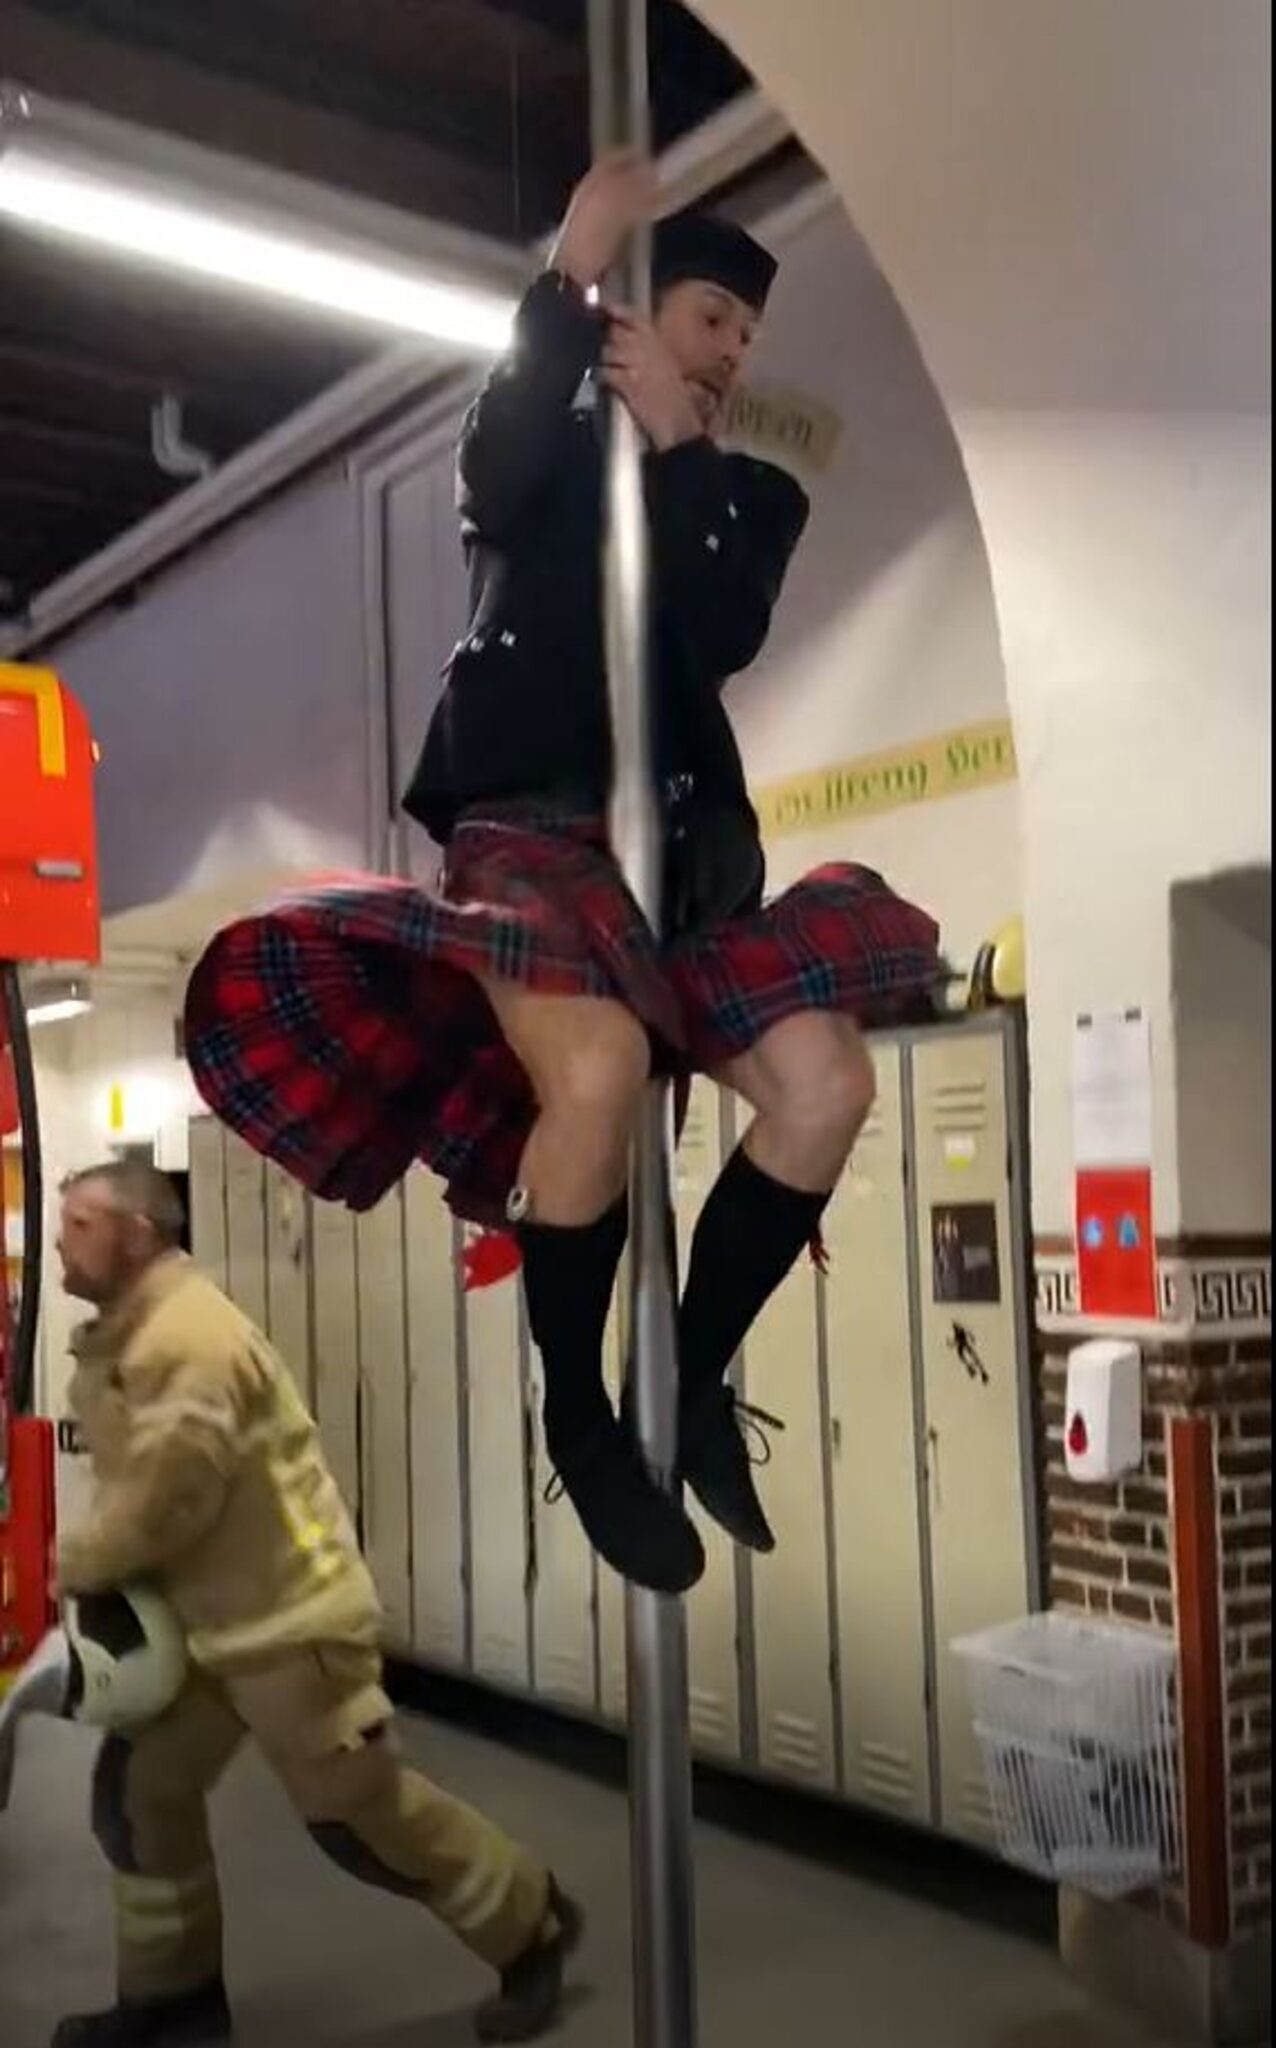 Hilarious comedian sliding down fireman's pole with bagpipes